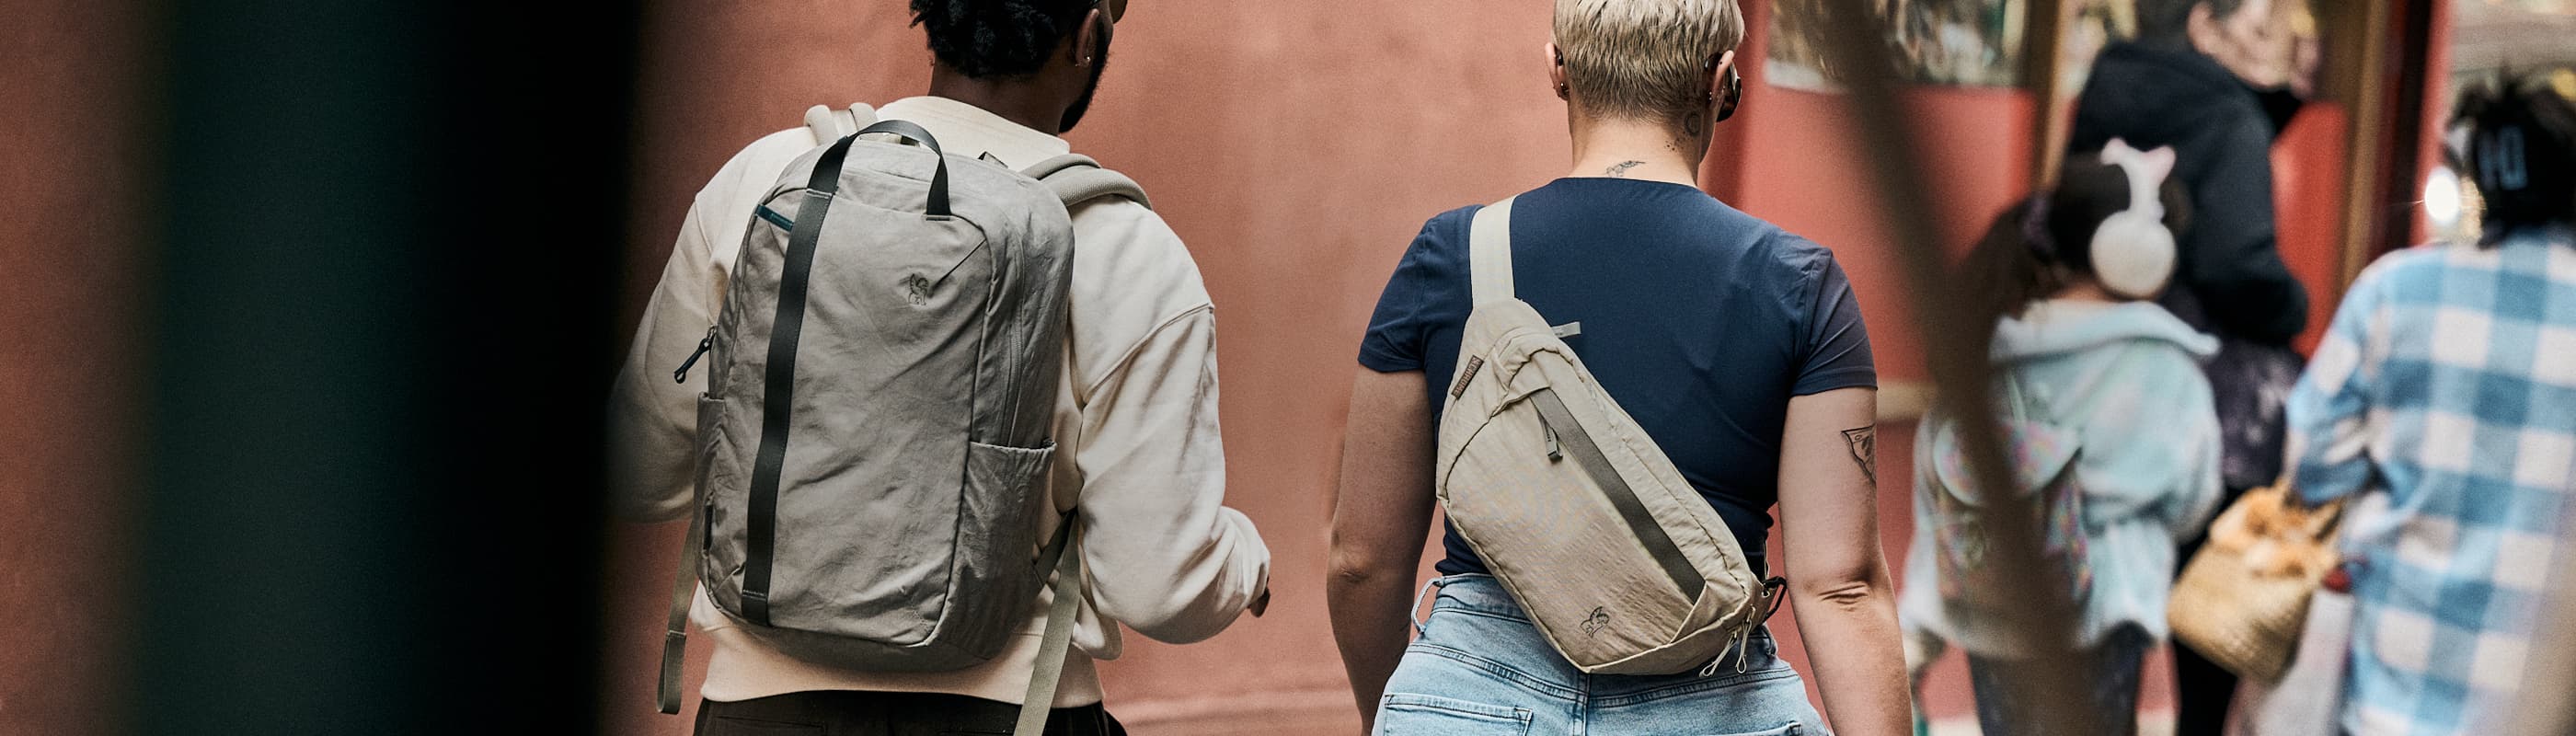 District bags worn by two people walking